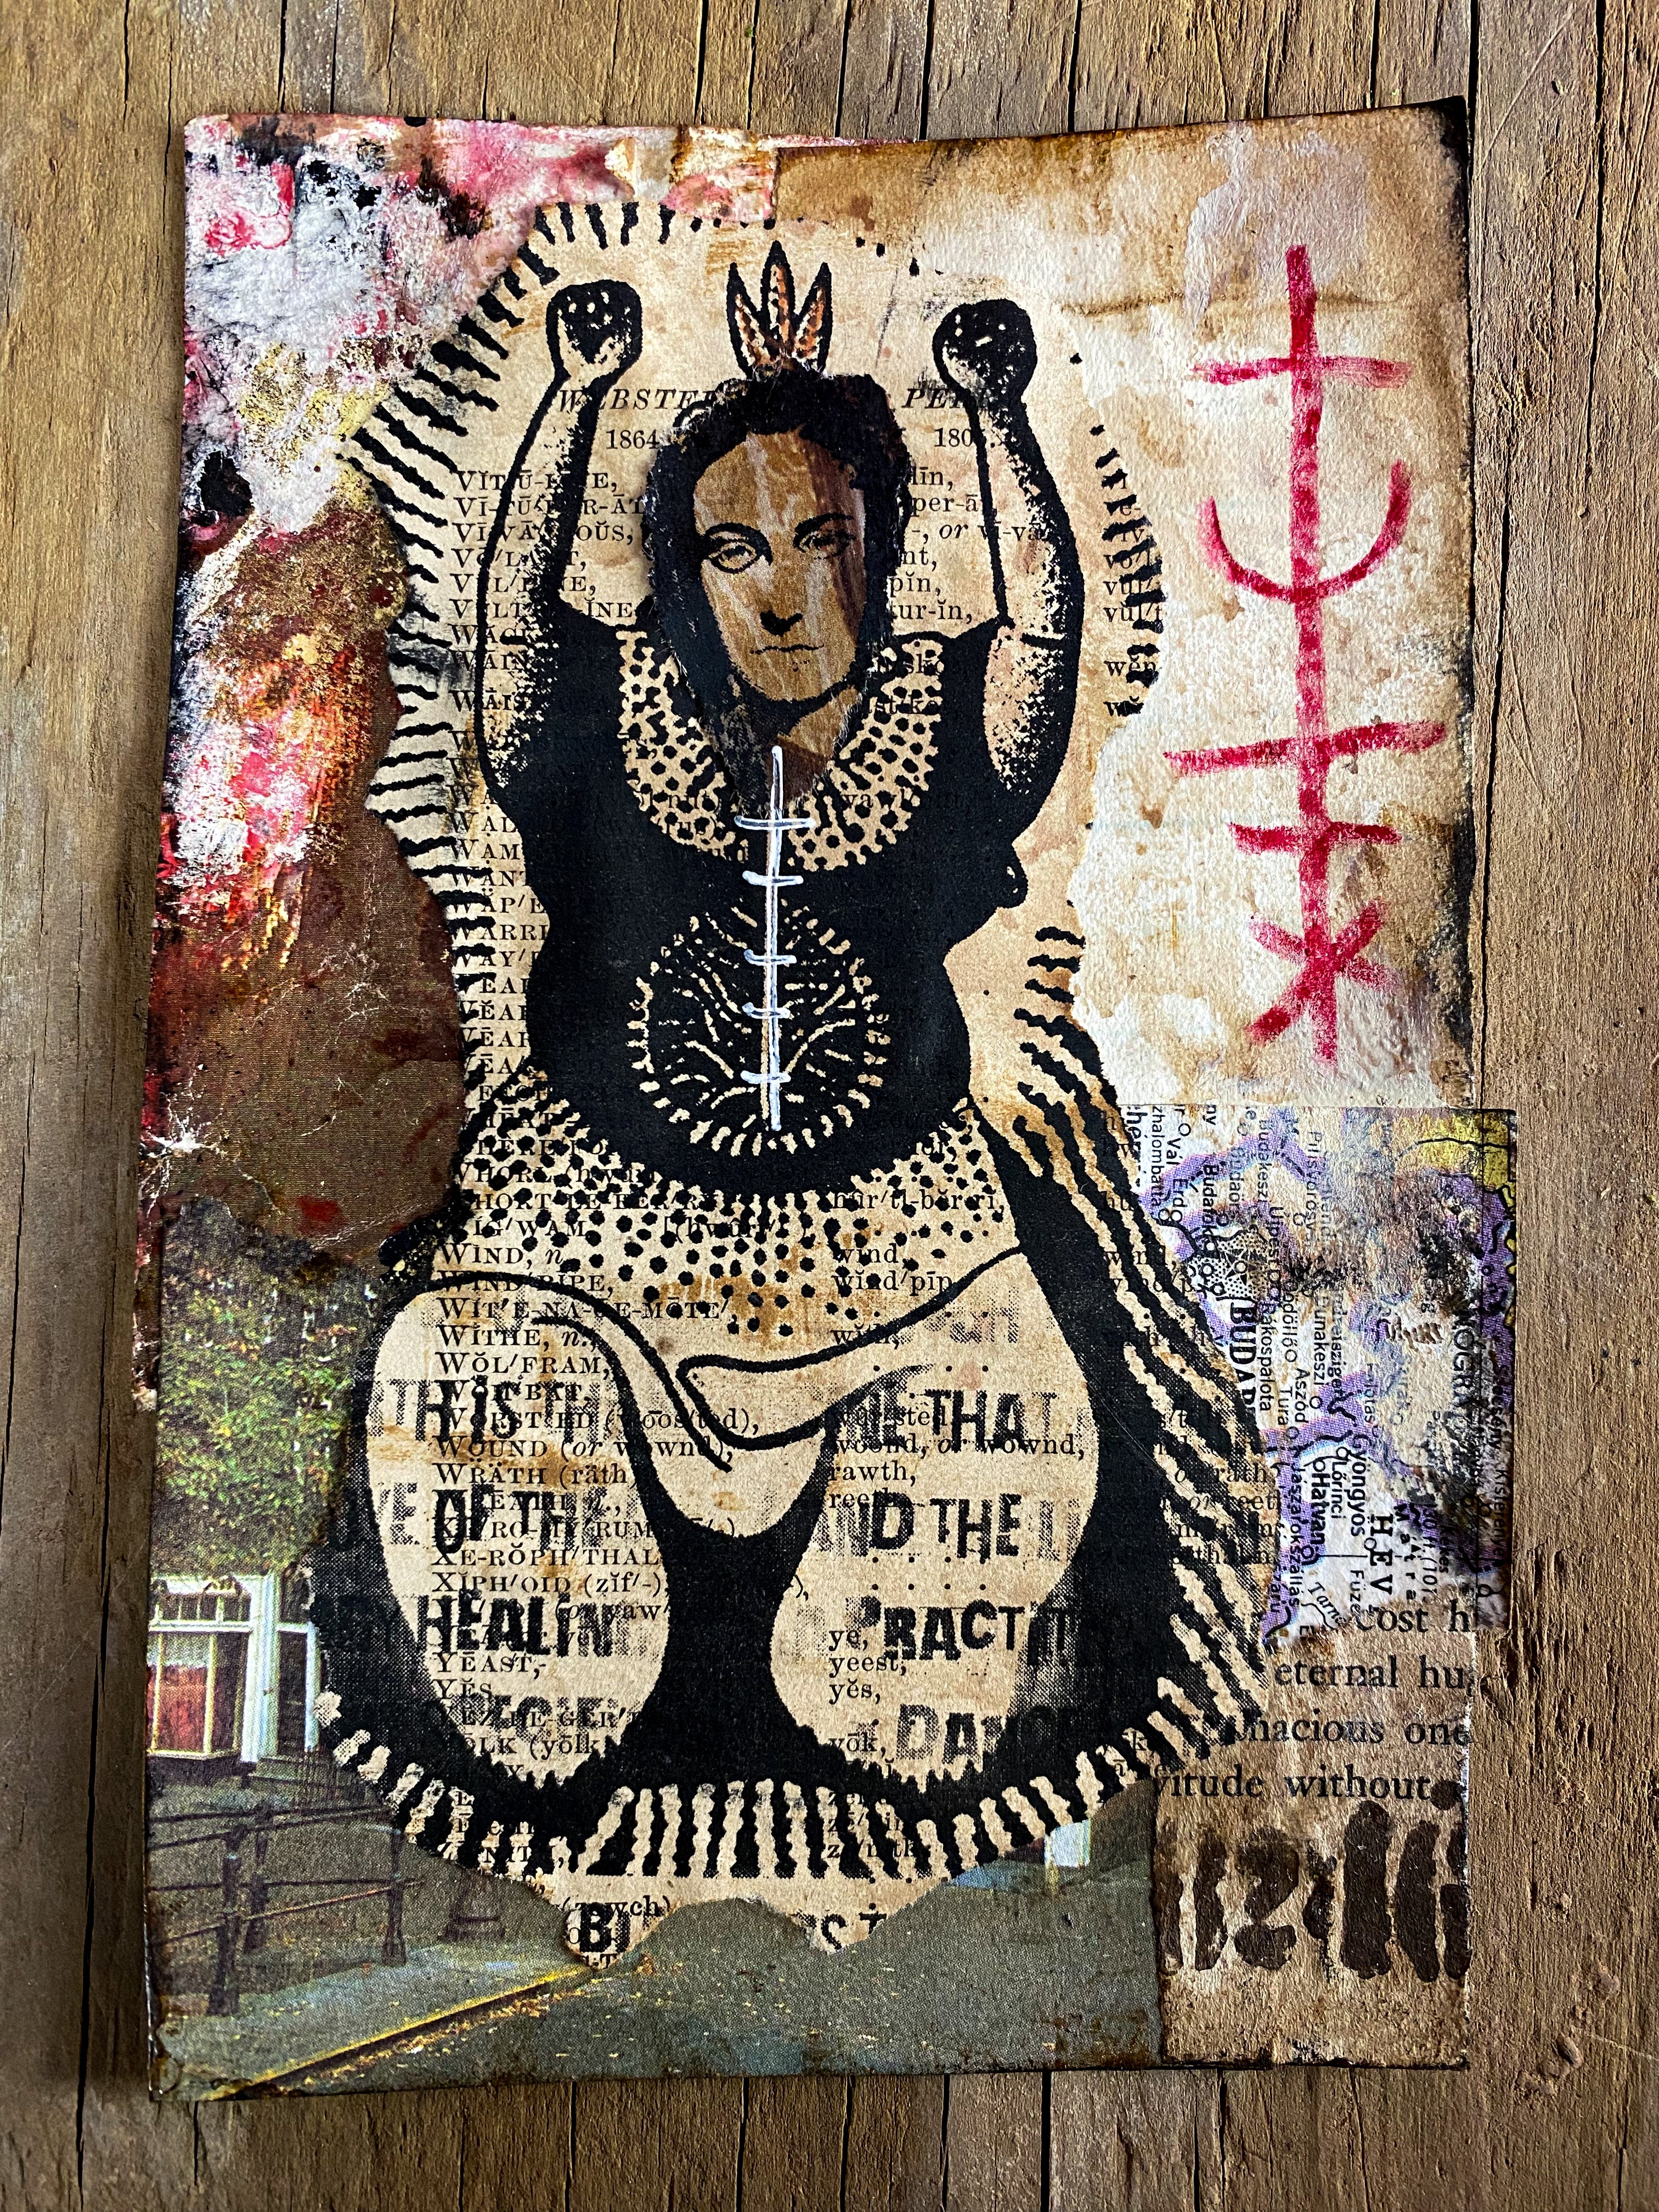 This Healing Journey - Original Mixed Media Collage